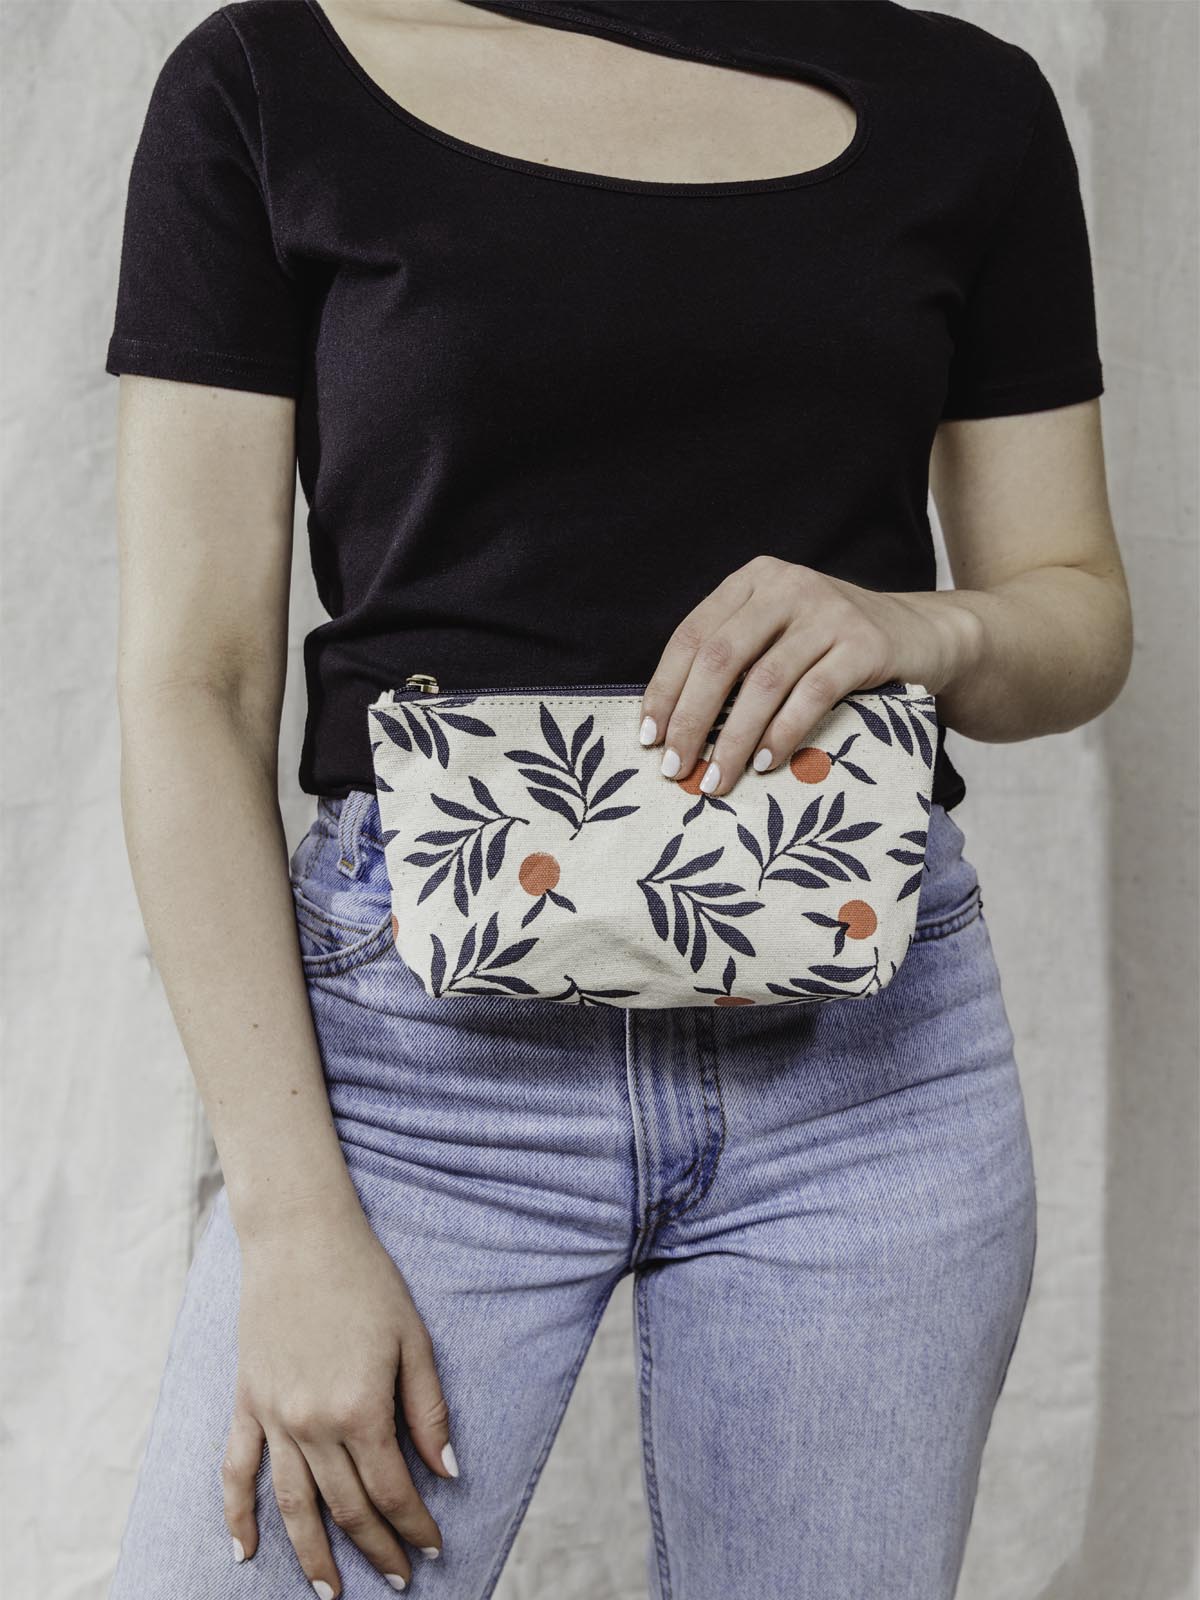 Model holding waterproof berry patterned pouch